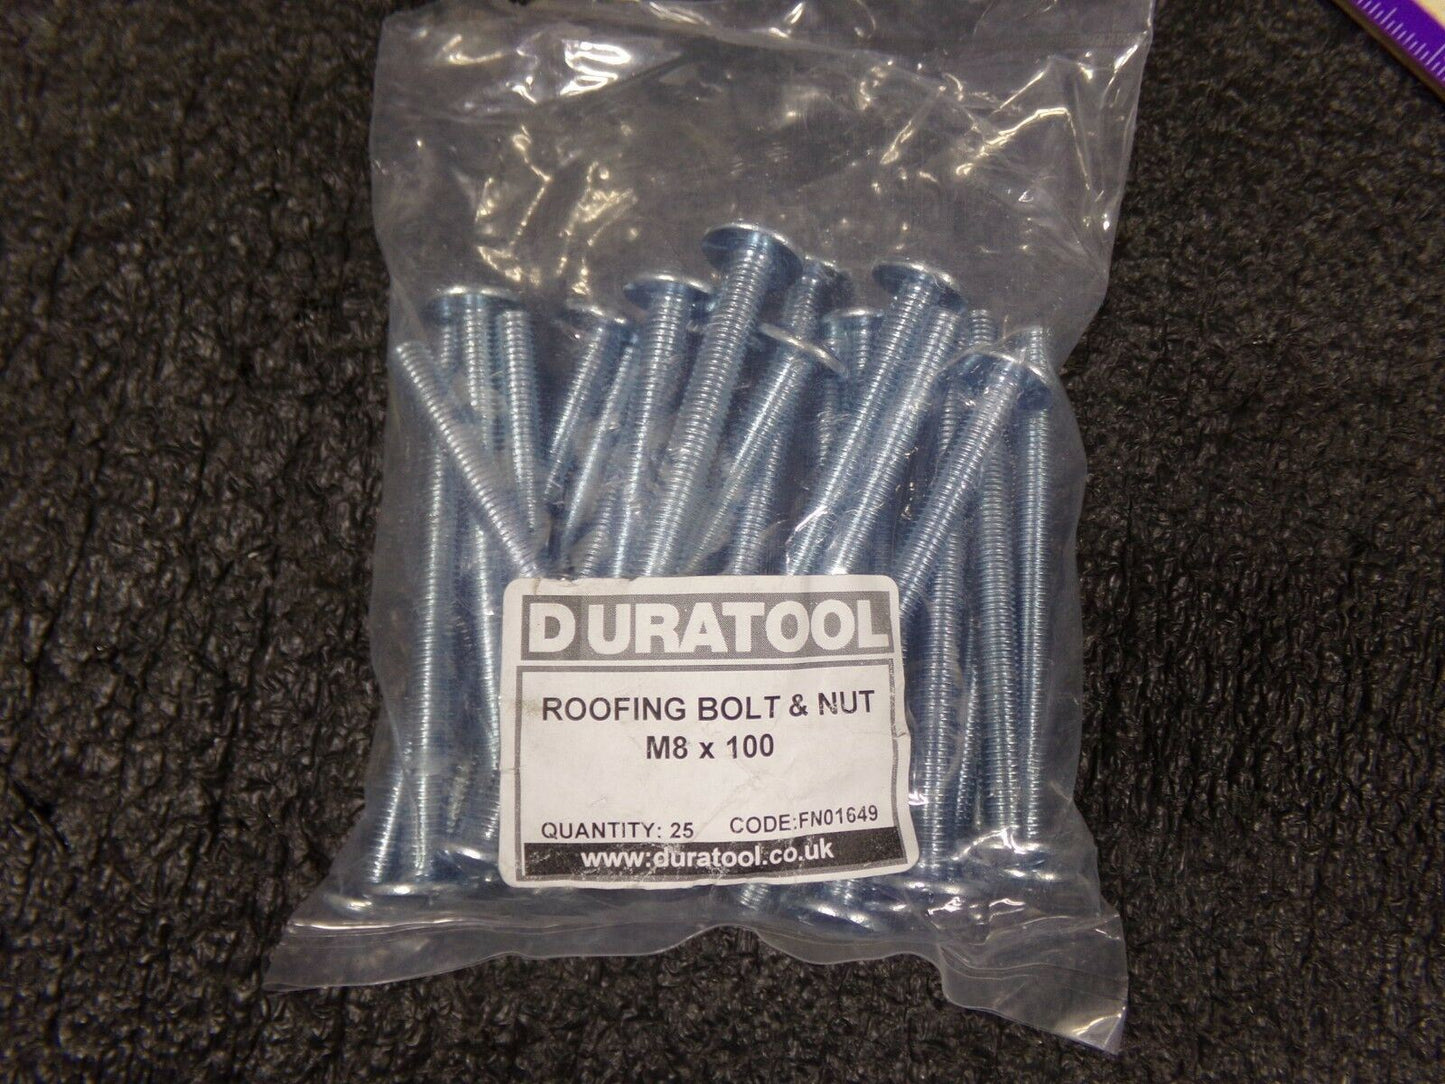 Duratool Roofing Bolt & Nut M8x100 LOT OF 25 (183555637197-WTA36)